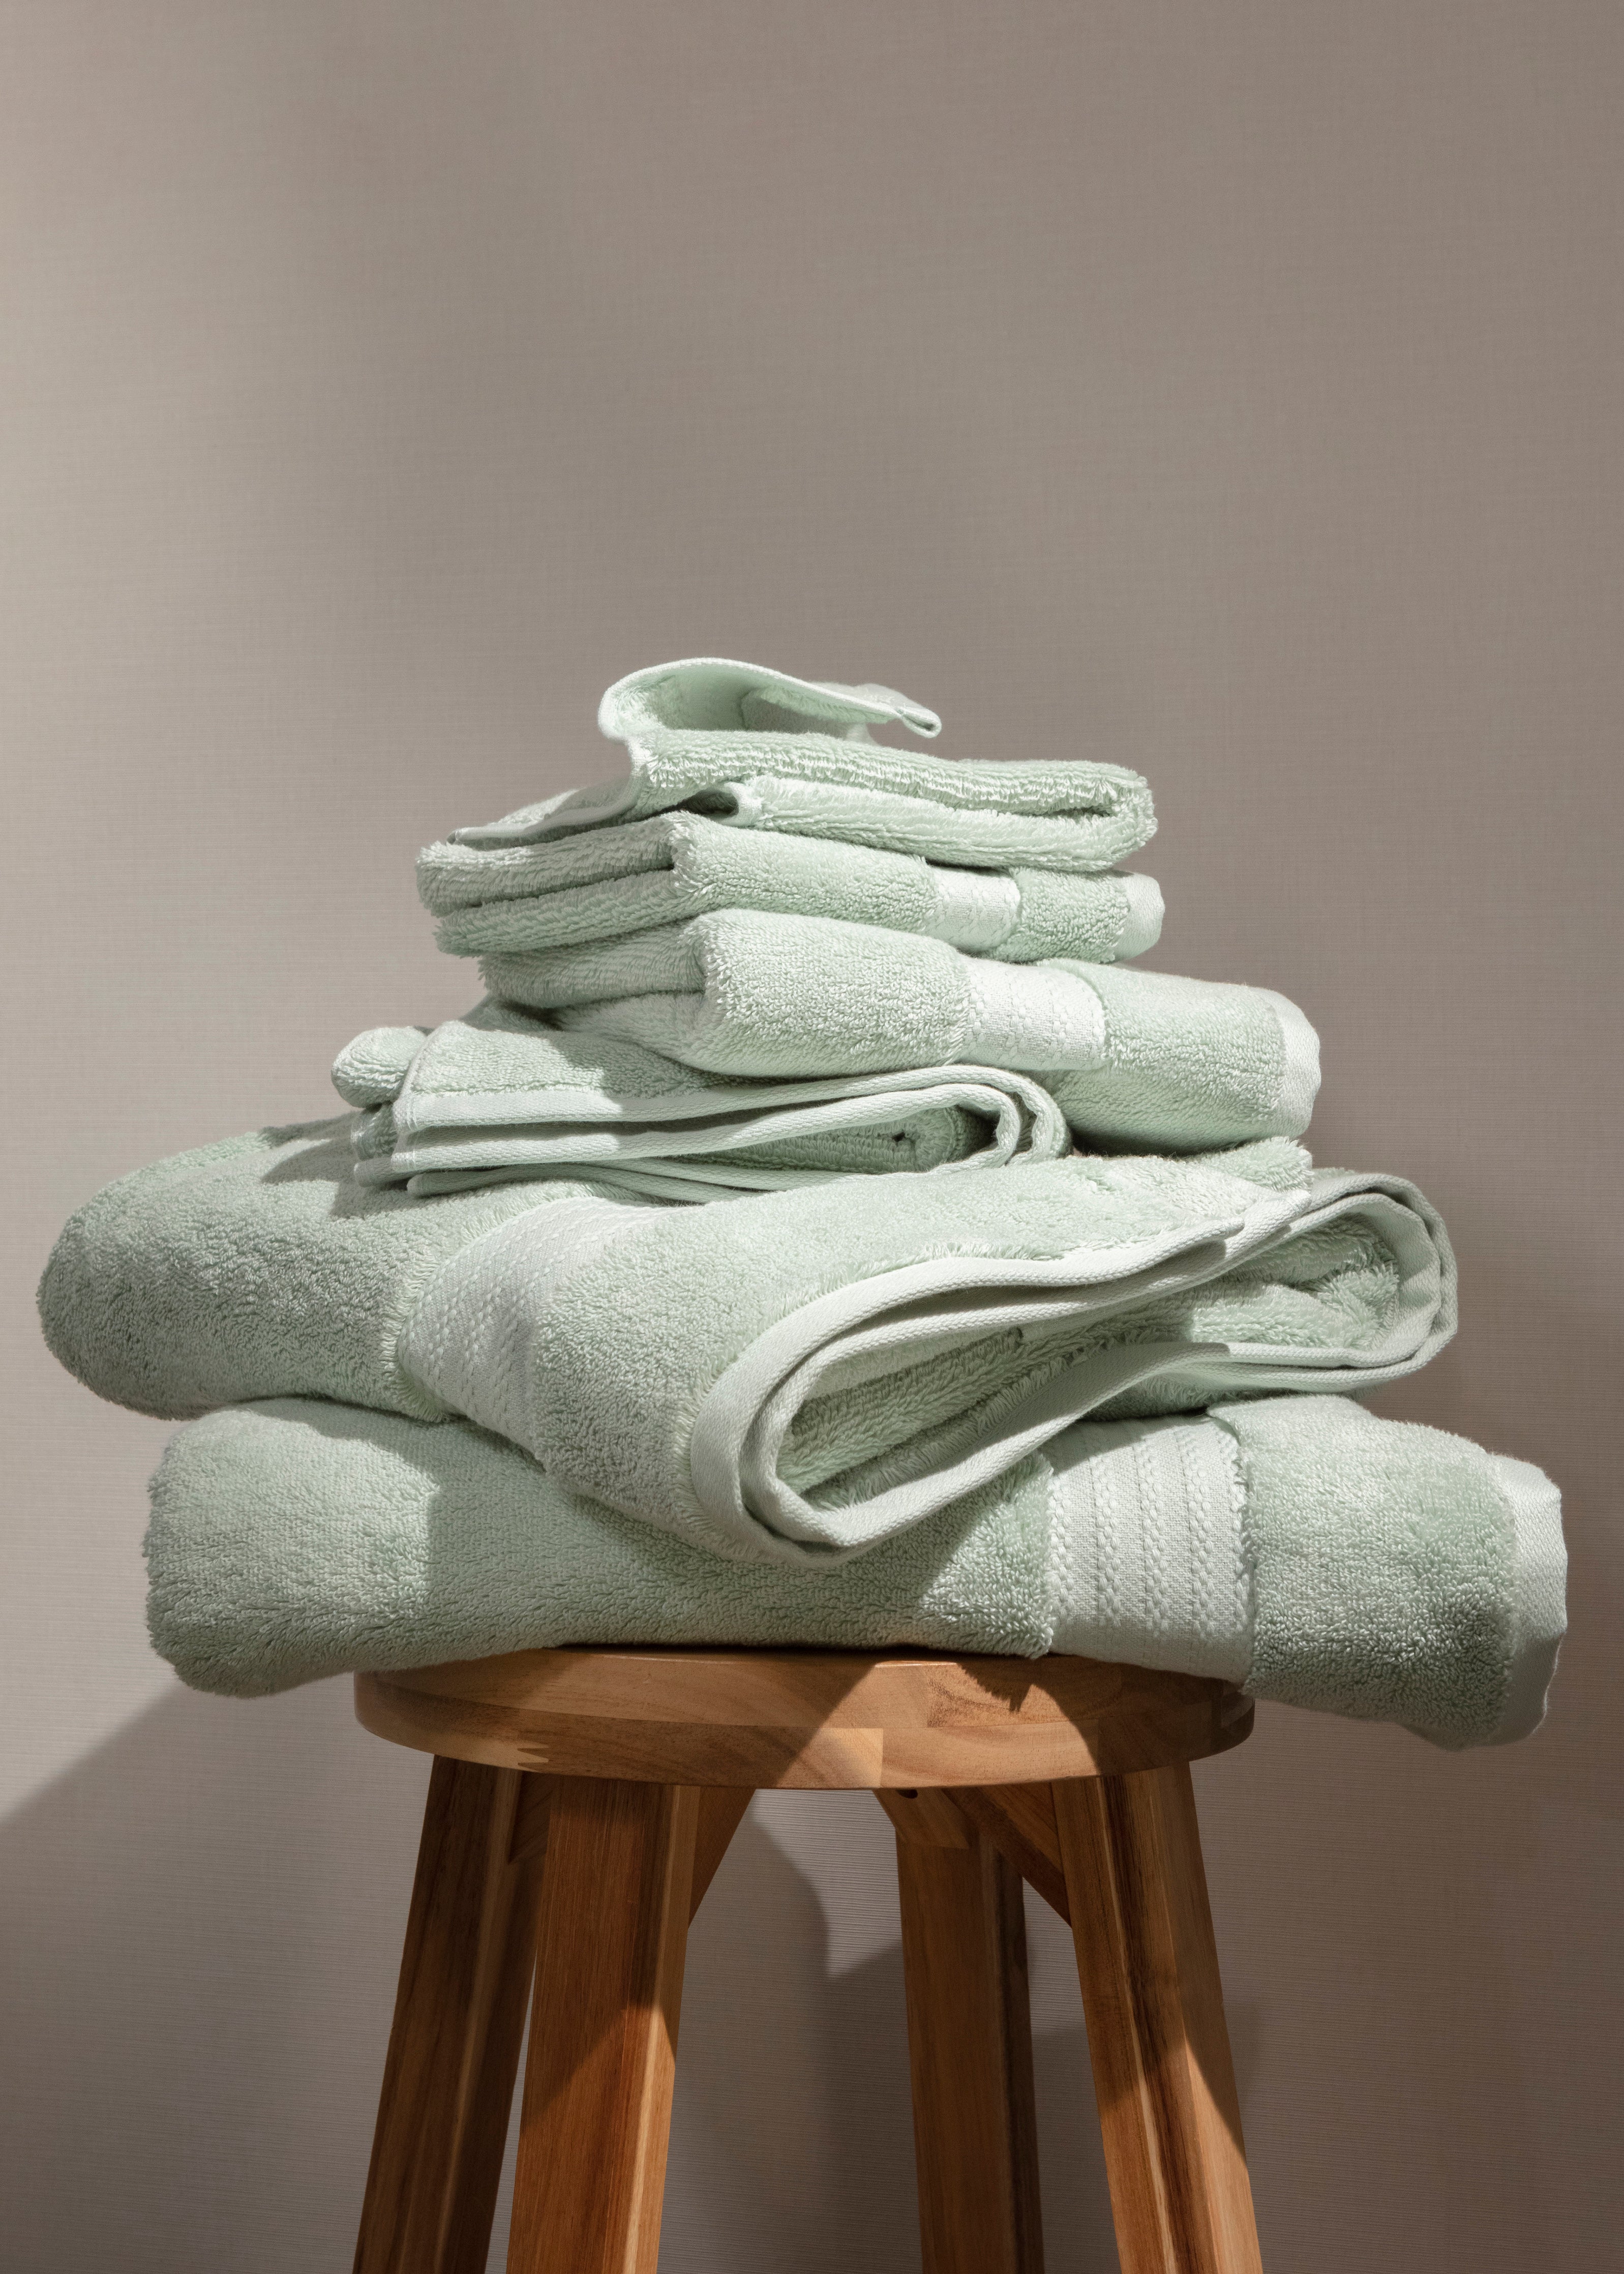 Under The Canopy GOTS Certified Luxe Organic Cotton Bath Towel, Pale Sage, Green